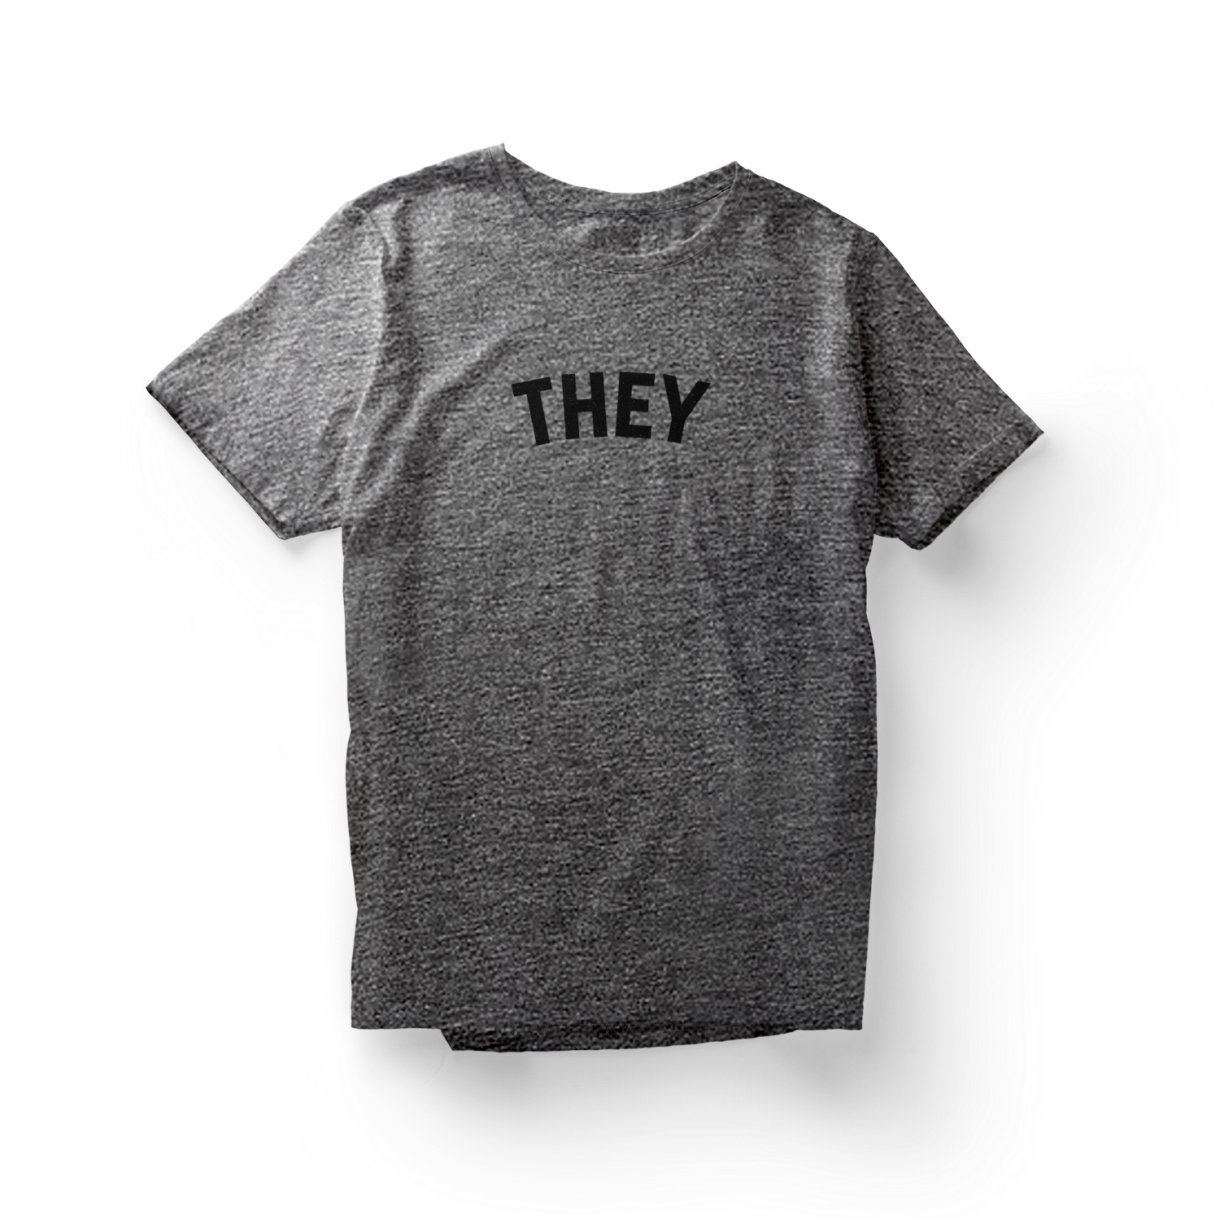 Heather Grey Shirt with a black "They" graphic